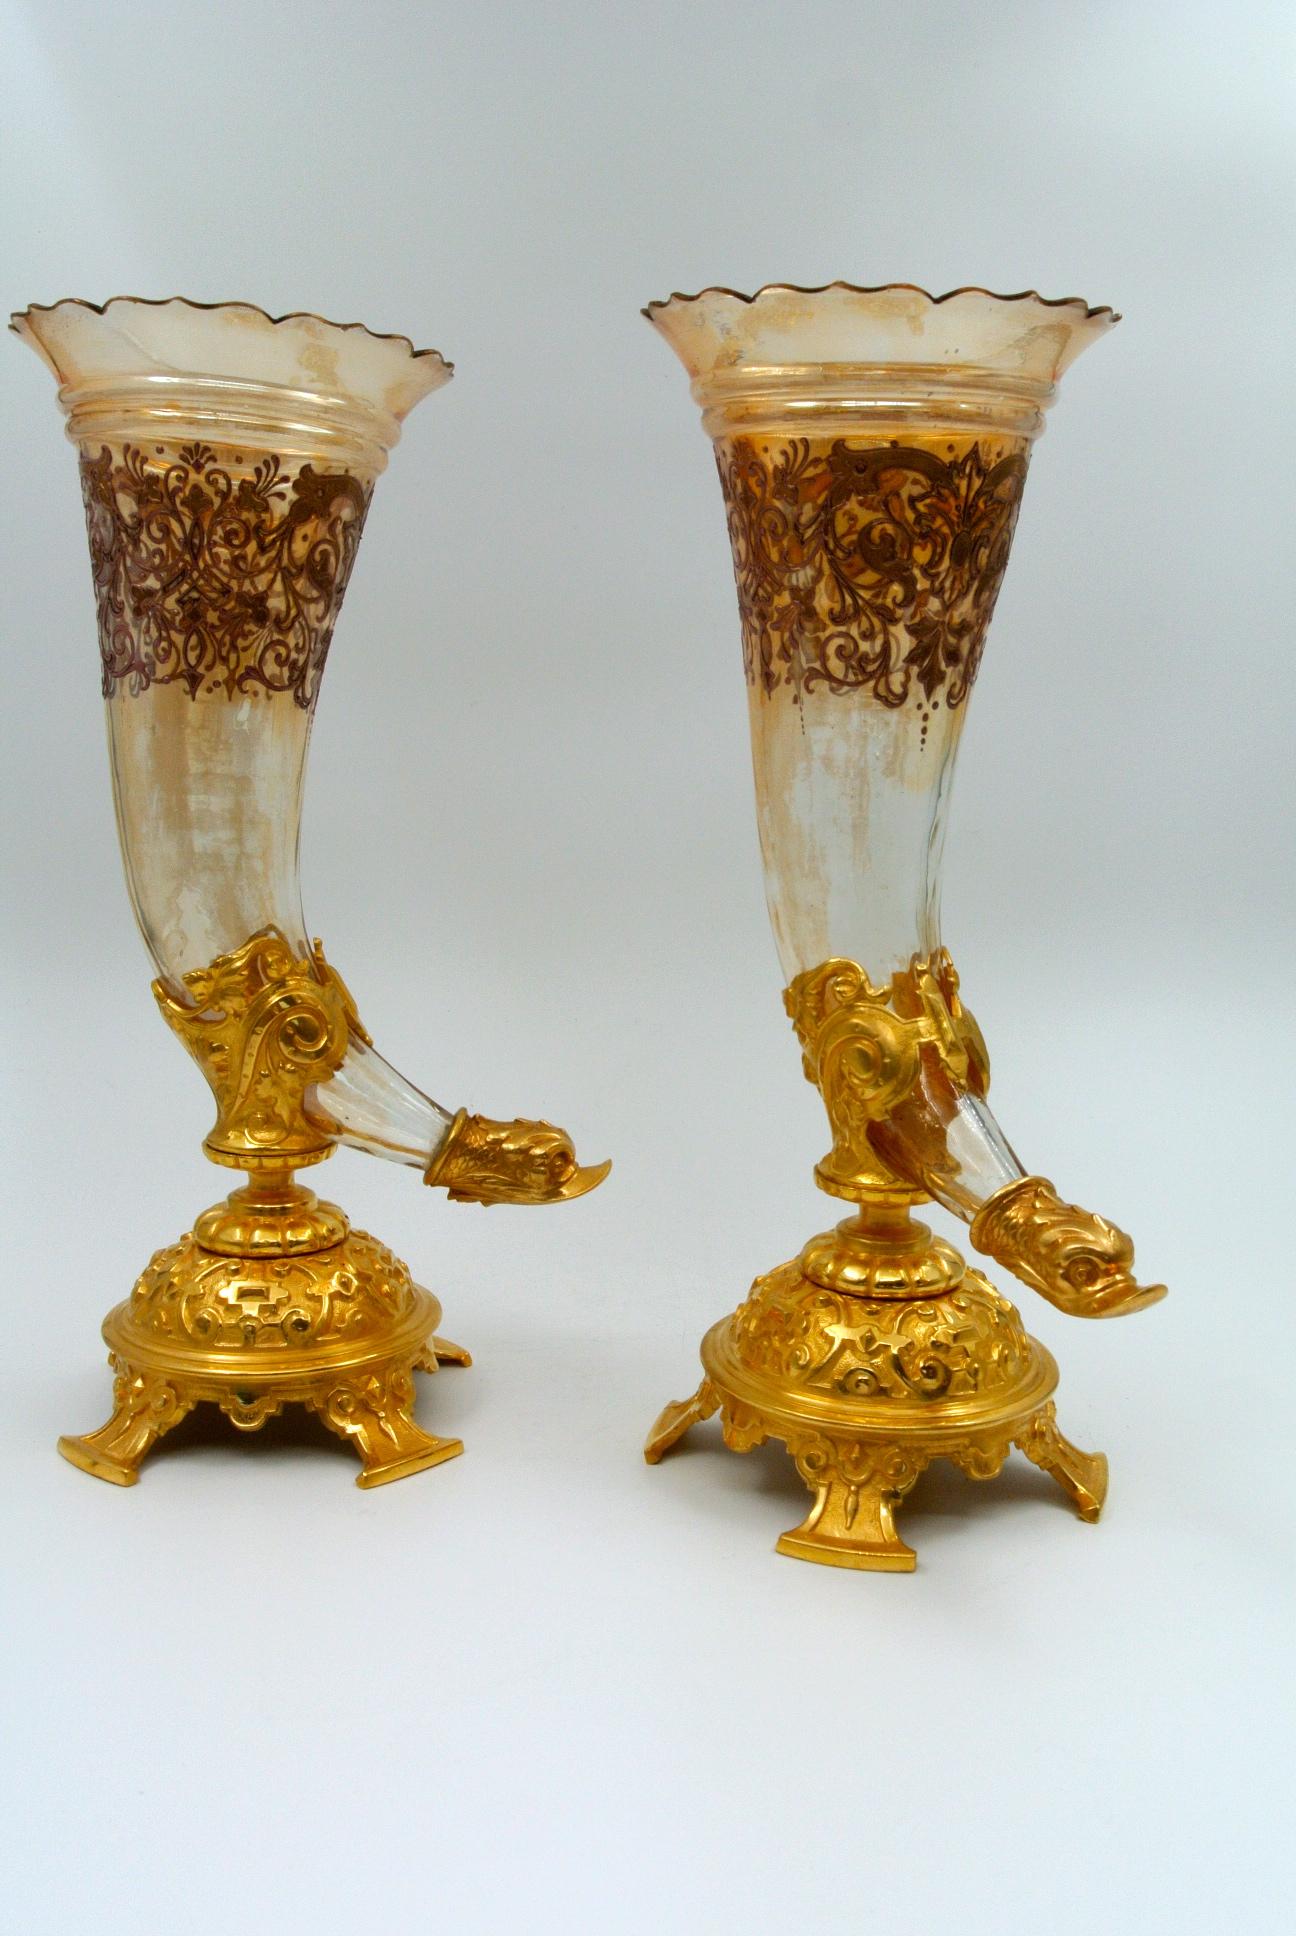 Napoleon III Pair of Bouquetières, Enameled Gilt Bronze and Crystal Vases